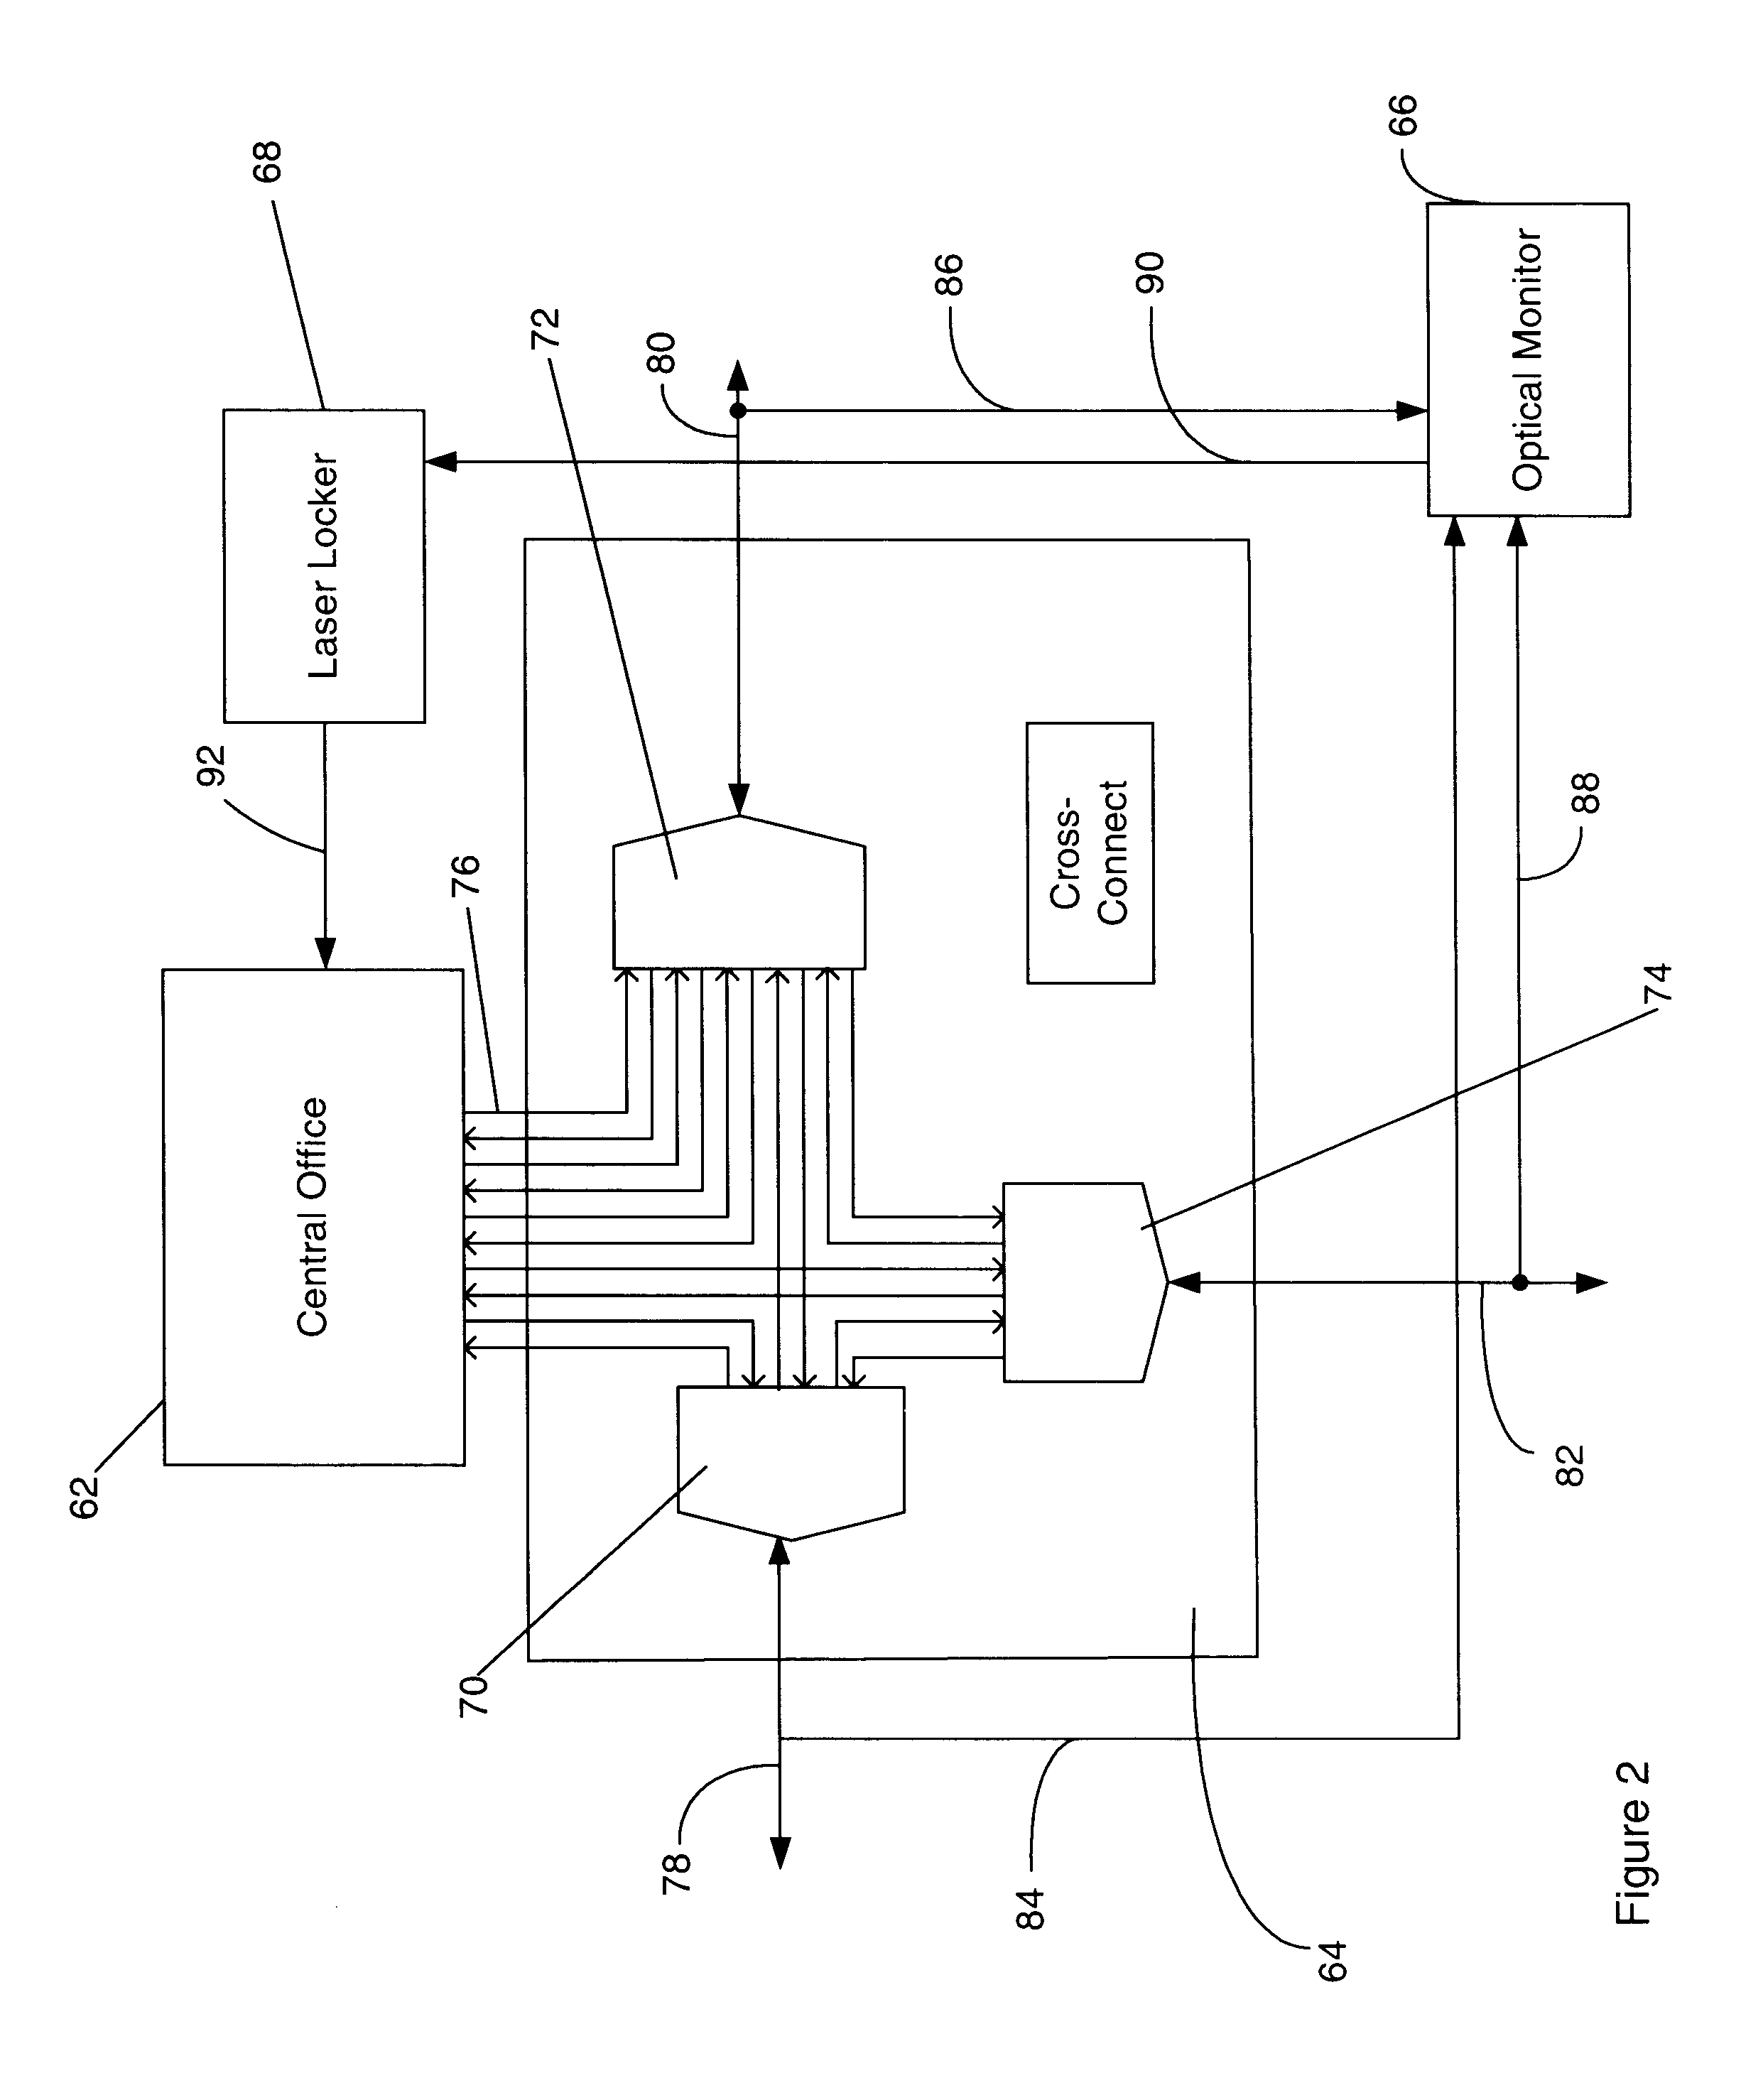 Optical power managed network node for processing dense wavelength division multiplexed optical signals